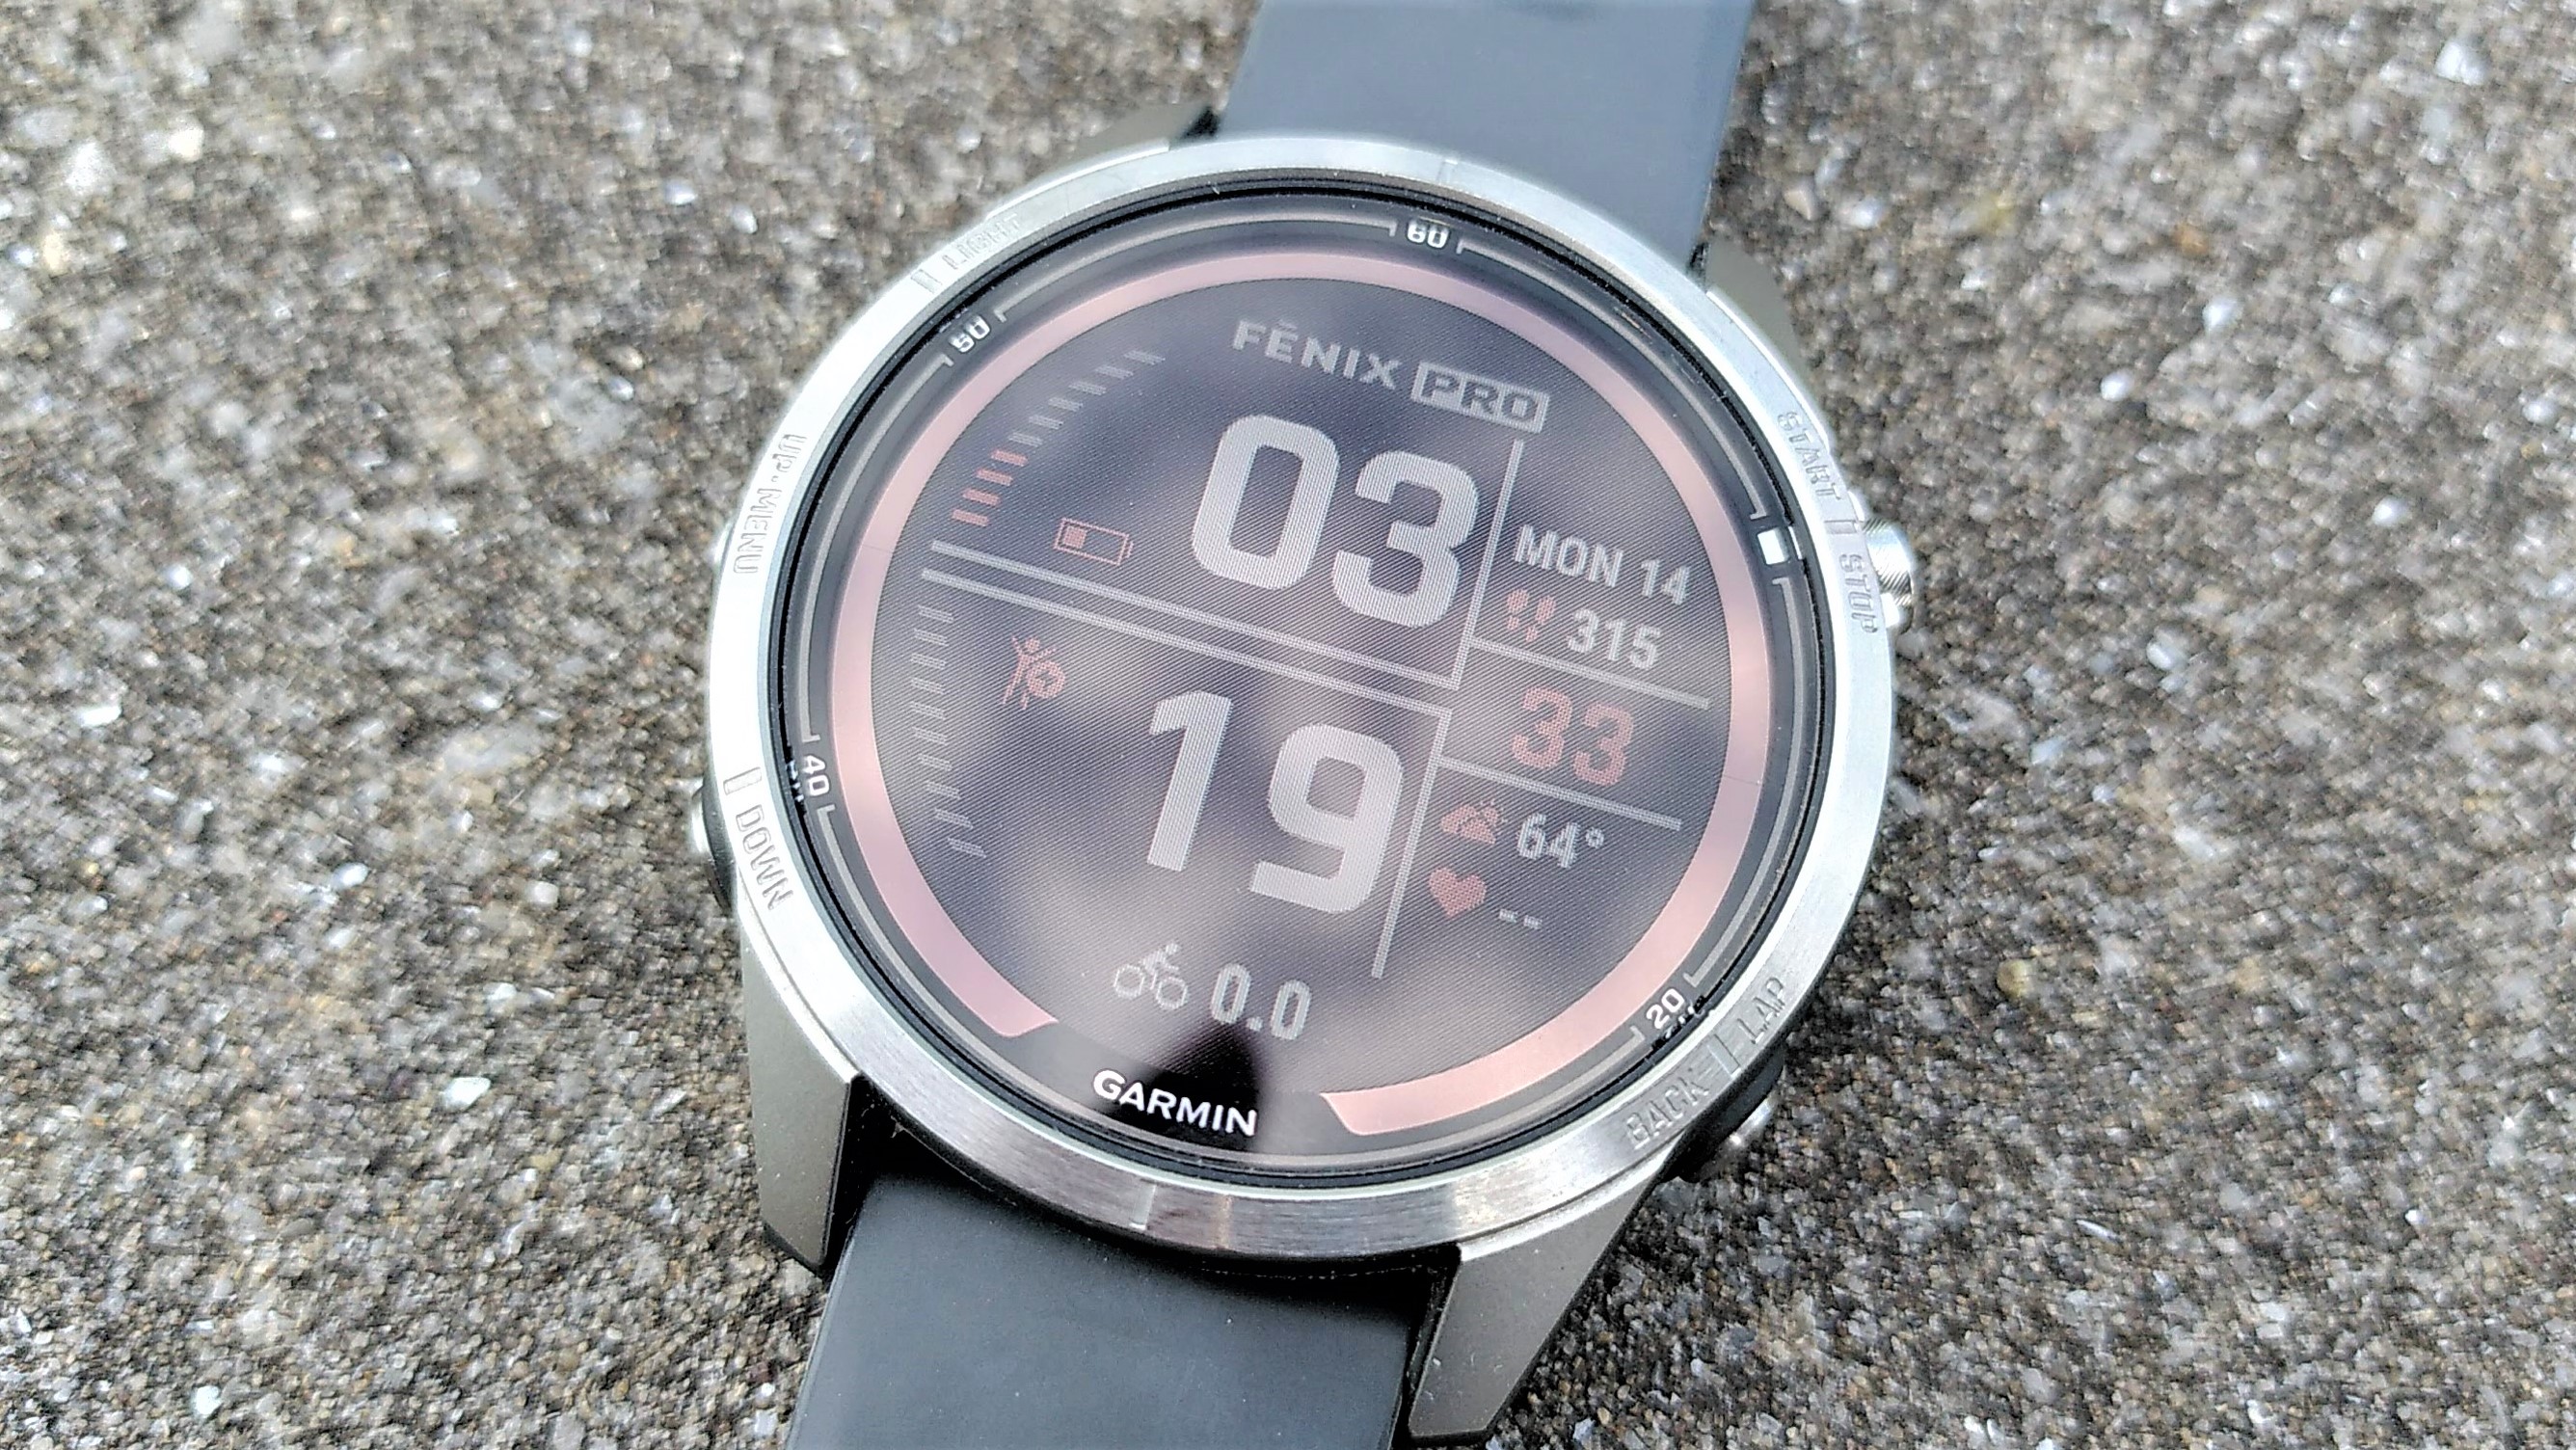 Garmin HRM-PRO Plus In-Depth Review: Here's what's changed! 